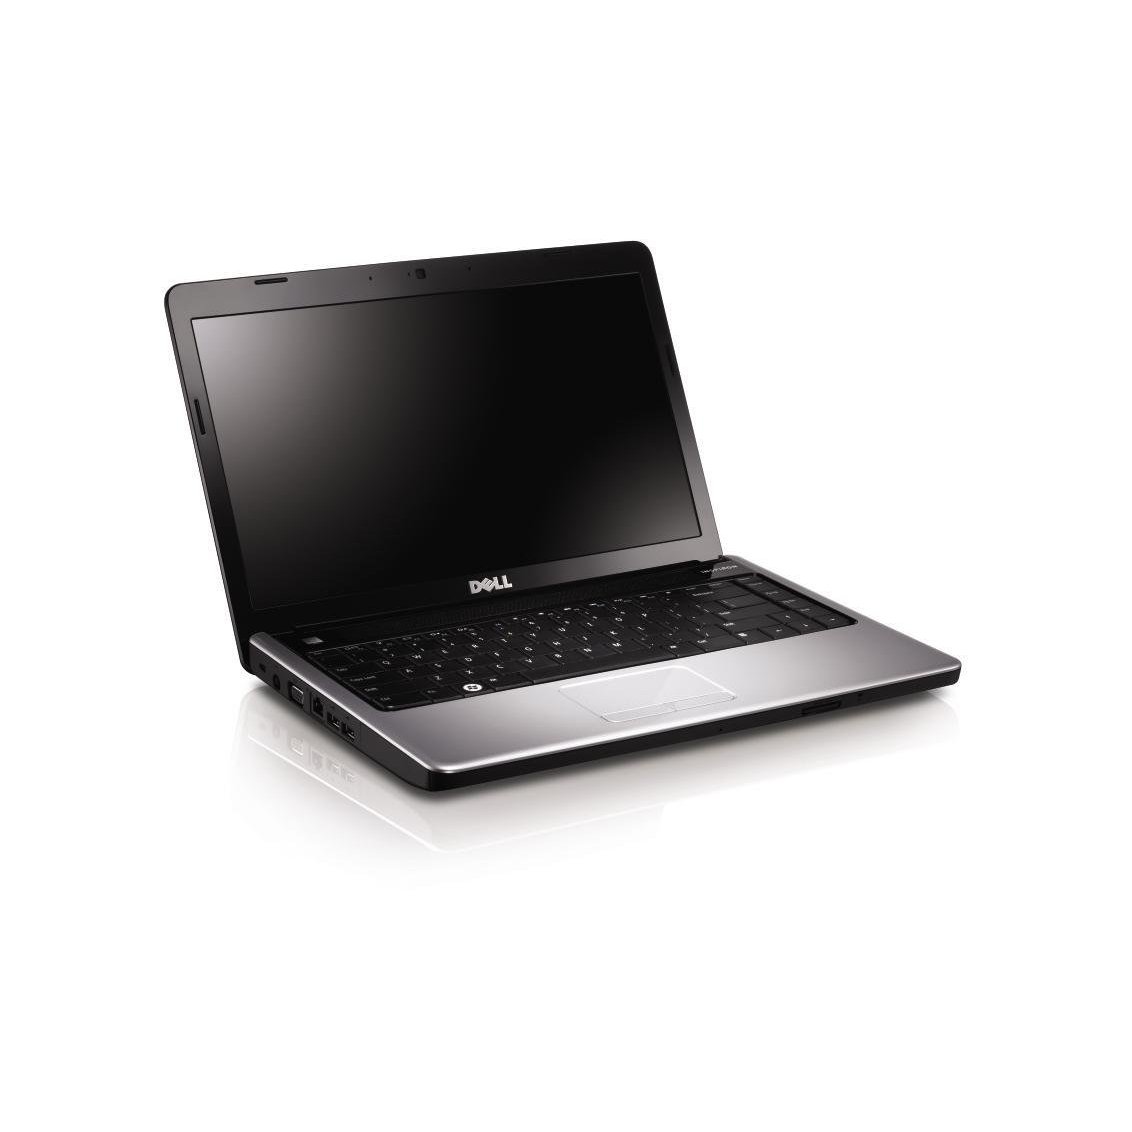 http://thetechjournal.com/wp-content/uploads/images/1109/1315912069-dell-inspiron-1470-14inch-laptop-1.jpg